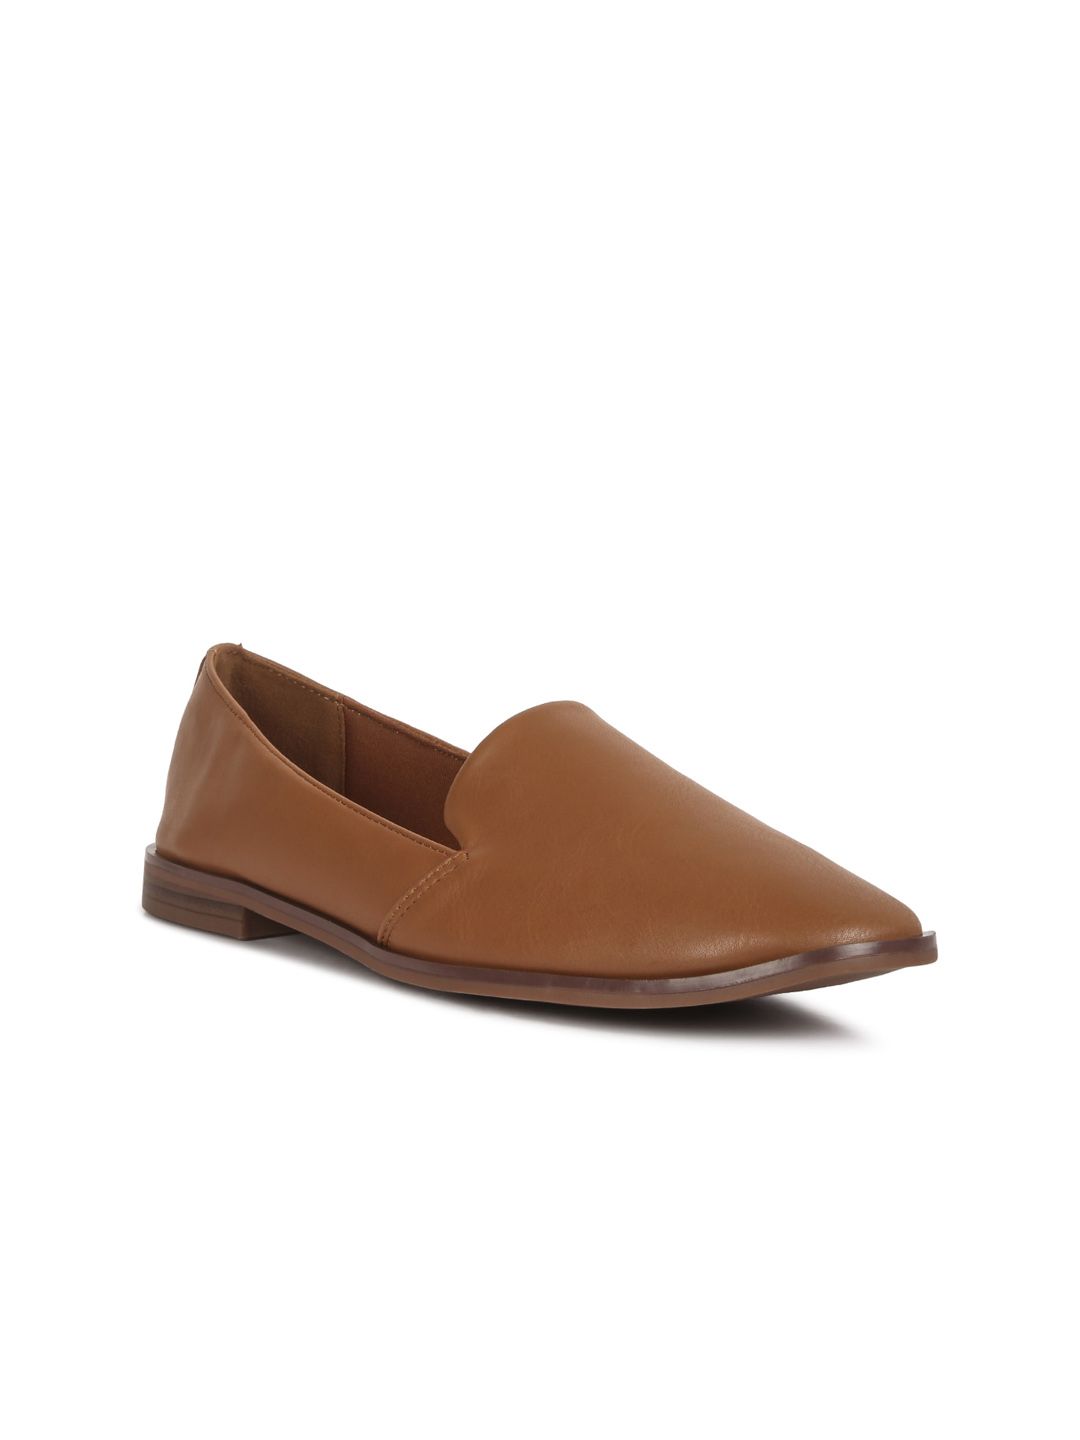 London Rag Women Comfort Insole Basics Loafers Price in India